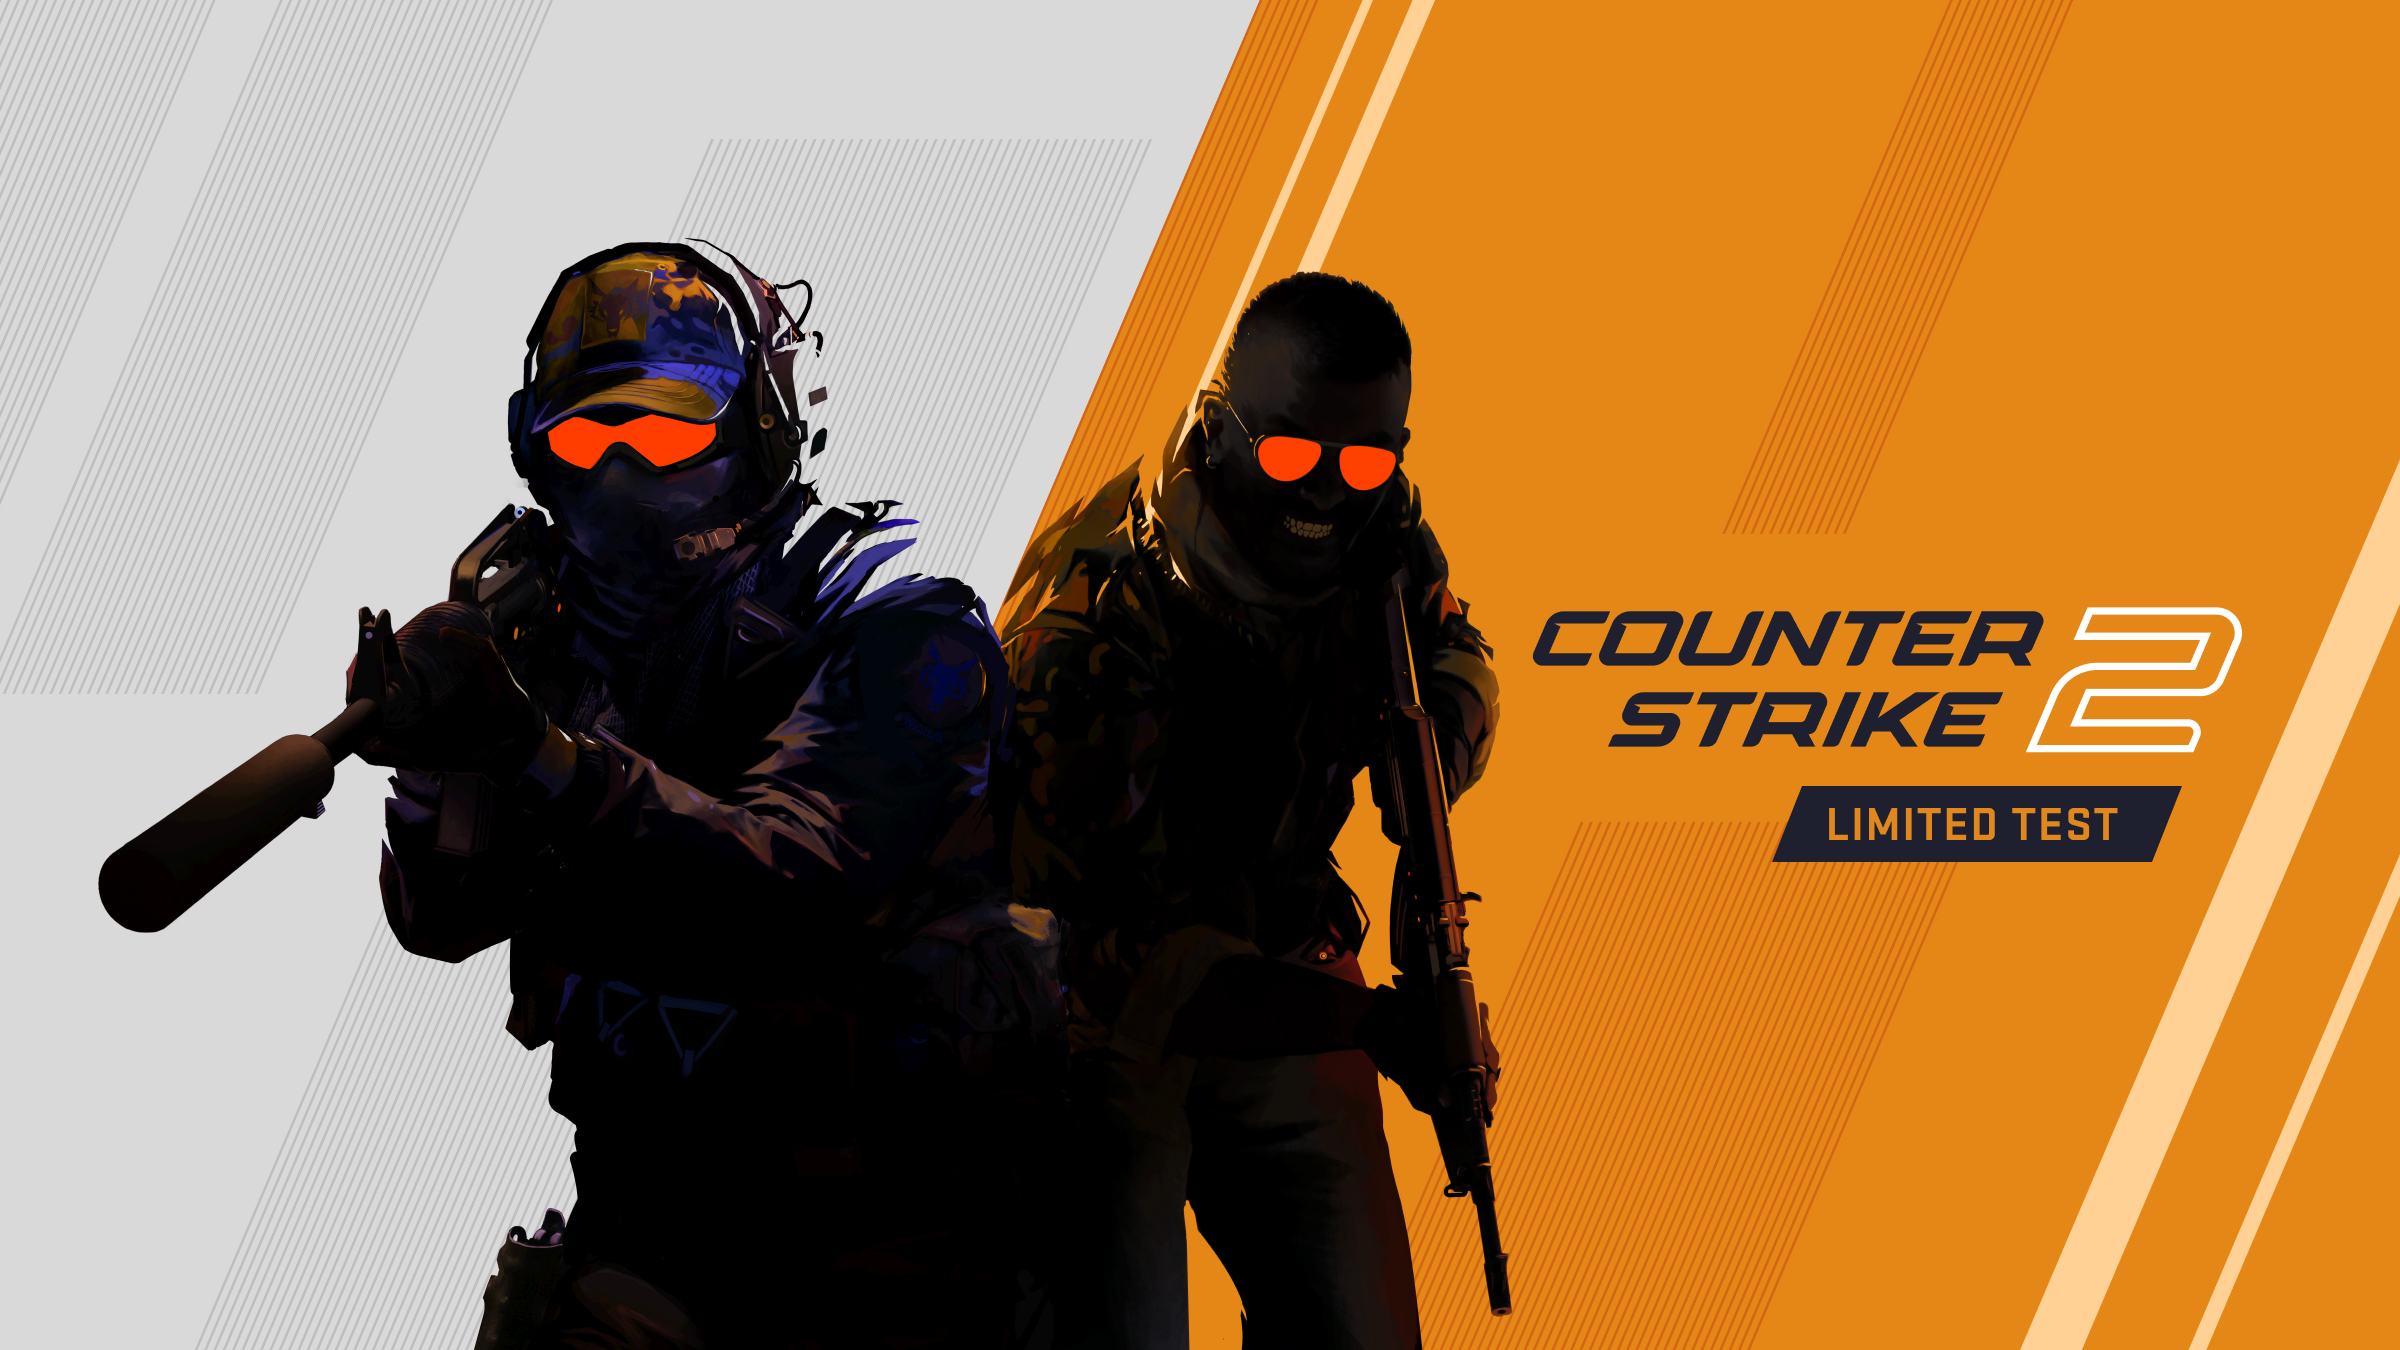 Introducing Counter-Strike 2 | Limited Test